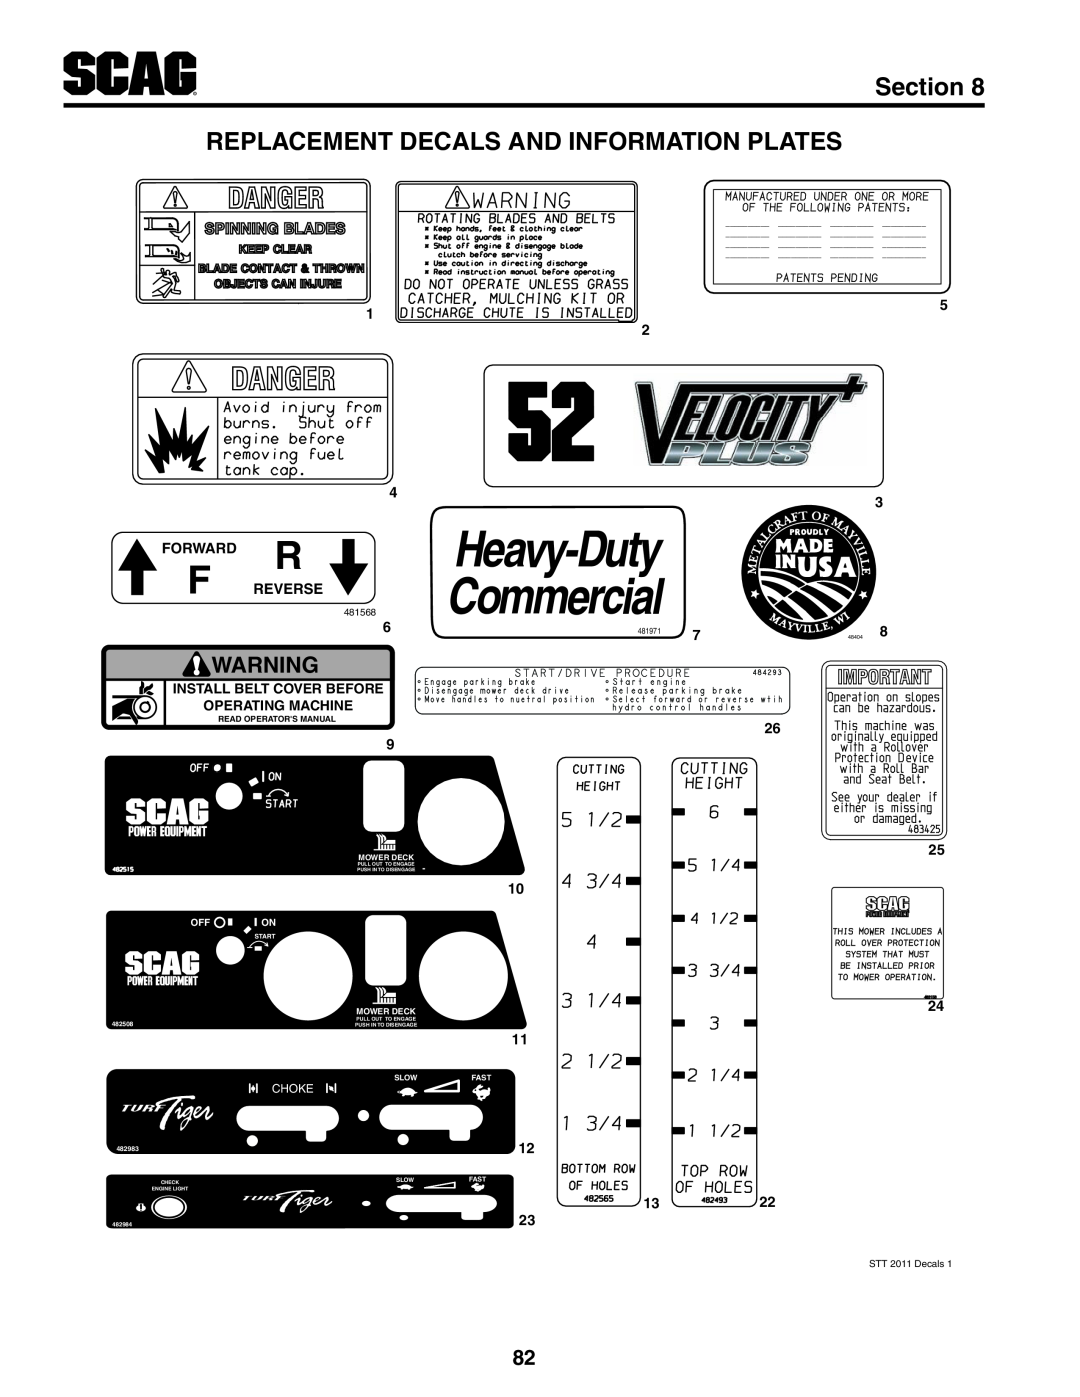 Scag Power Equipment STT61V-29DFI-LE Replacement Decals And Information Plates, Heavy-Duty, Commercial, Section, Forward 